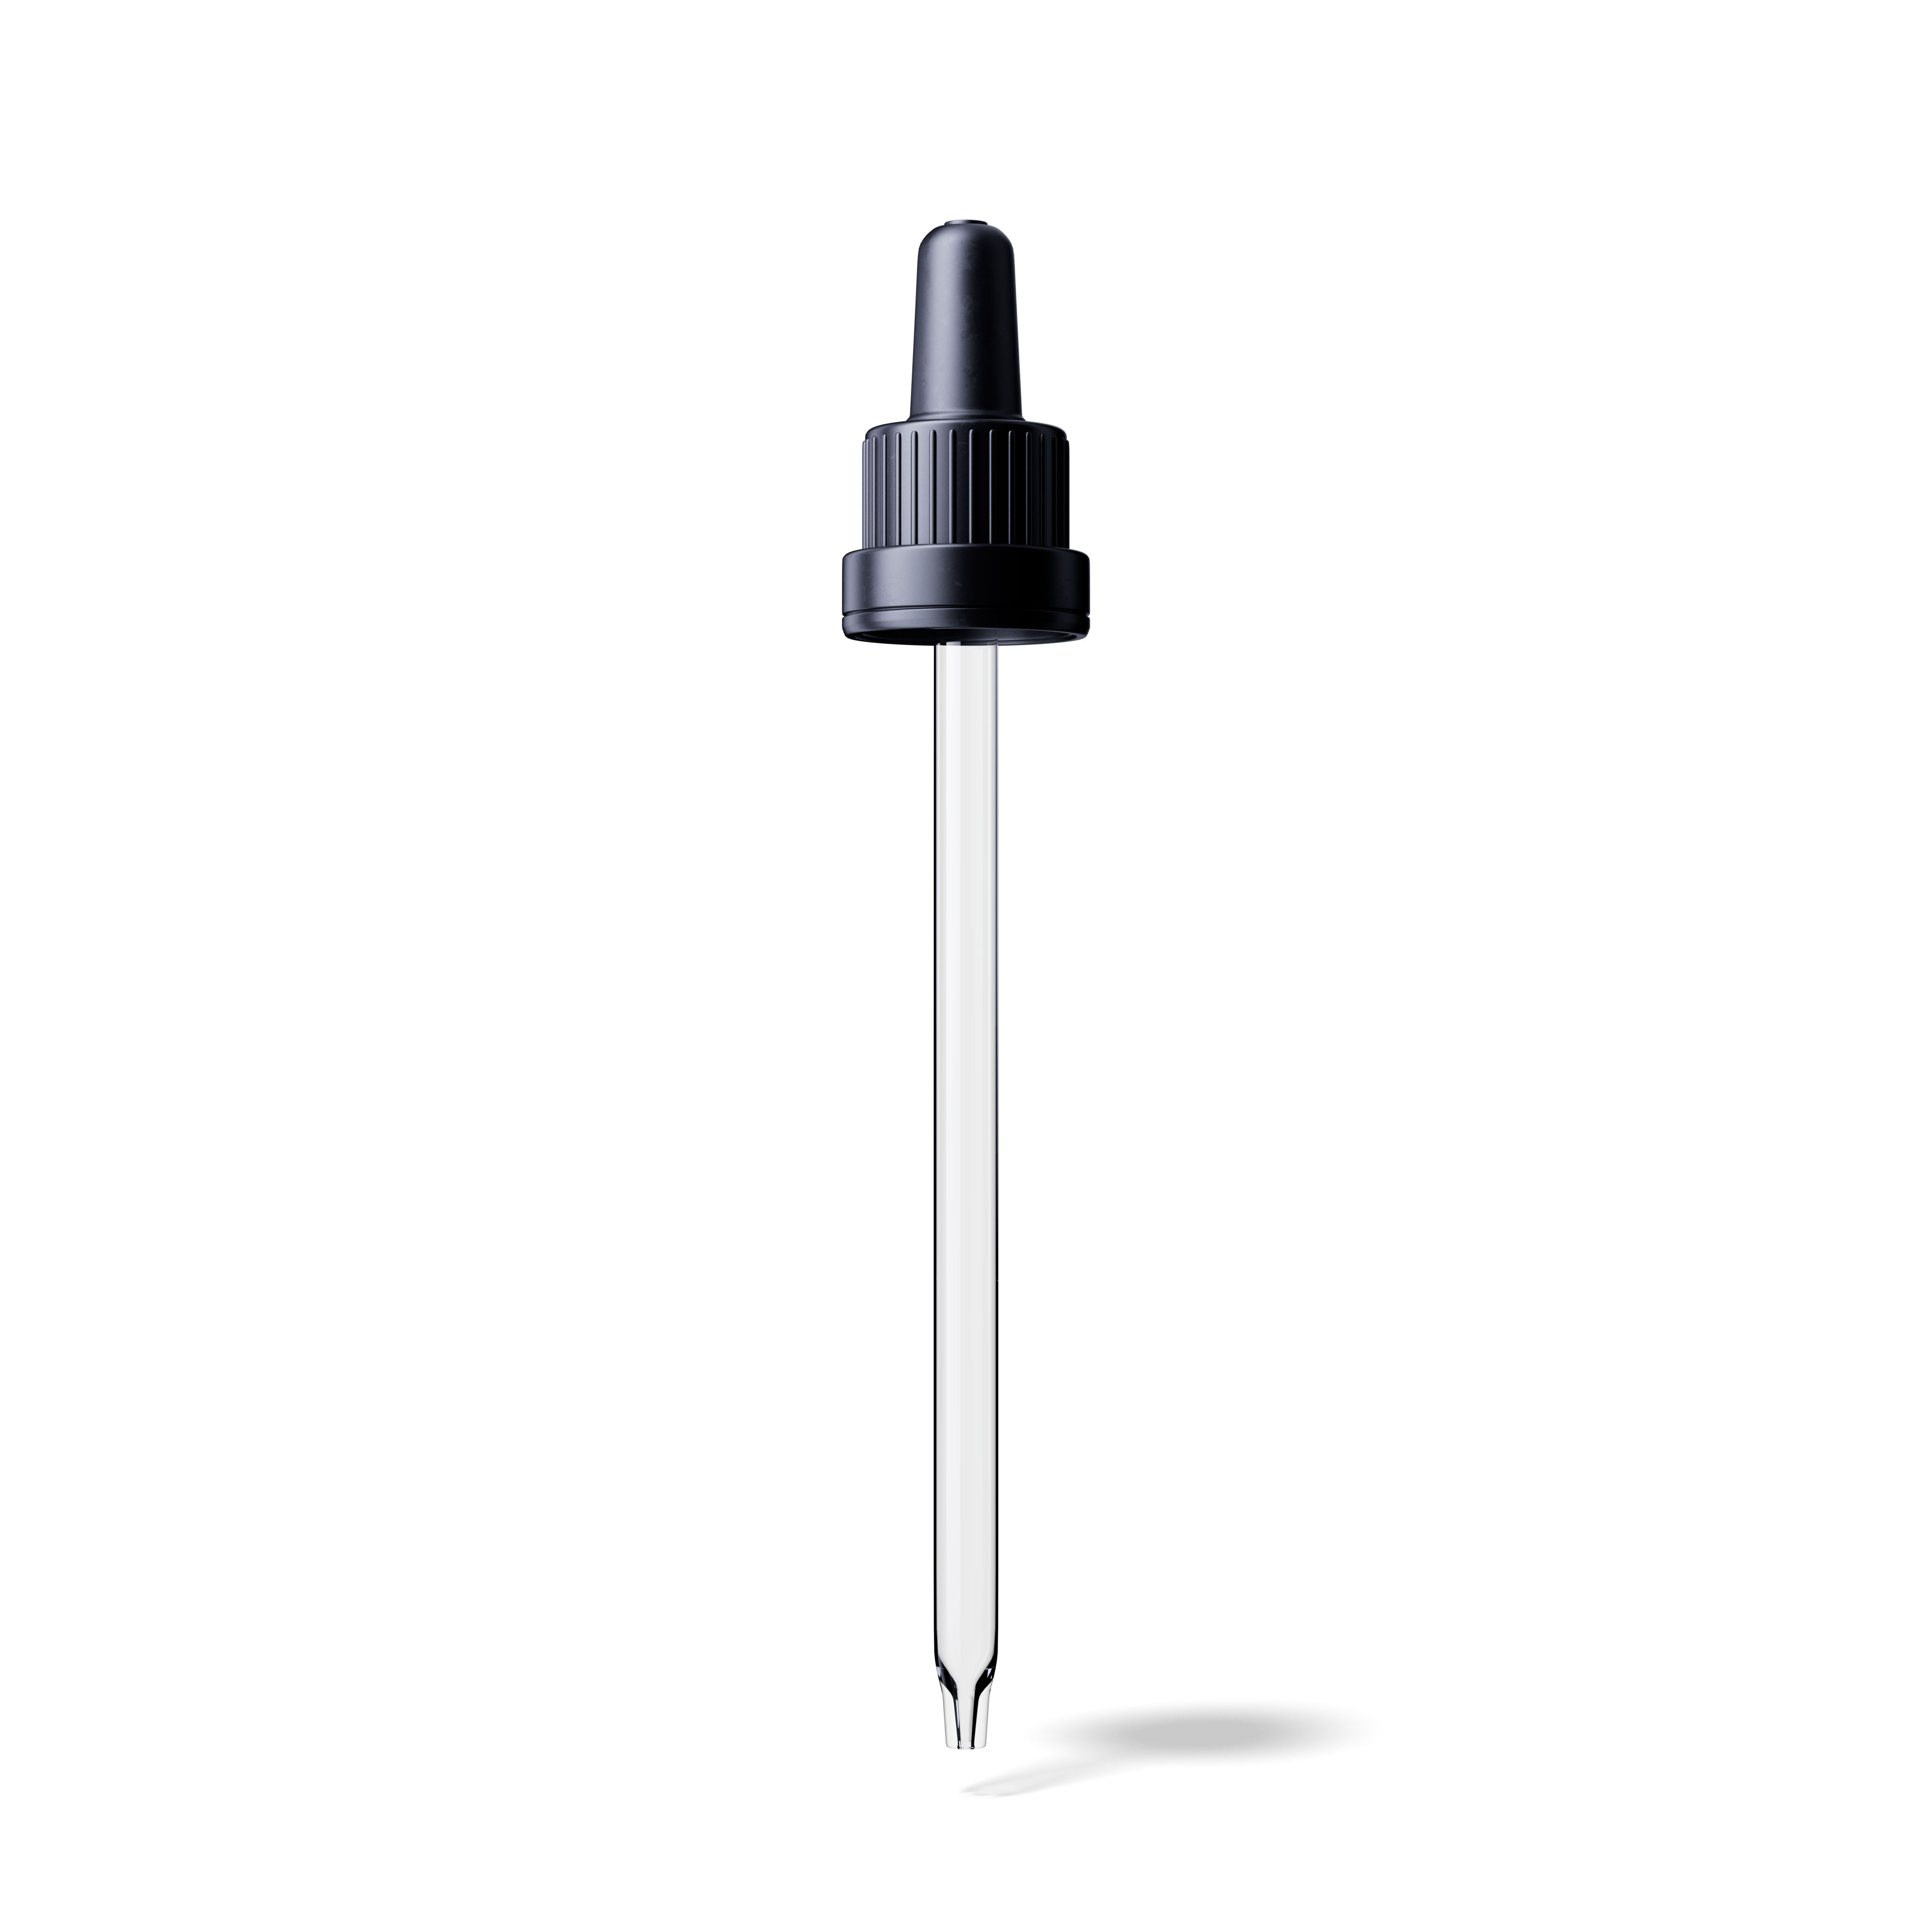 Pipette tamper evident DIN18, III, black, ribbed, bulb TPE, dose 0.7ml, conical tip (Orion 100)